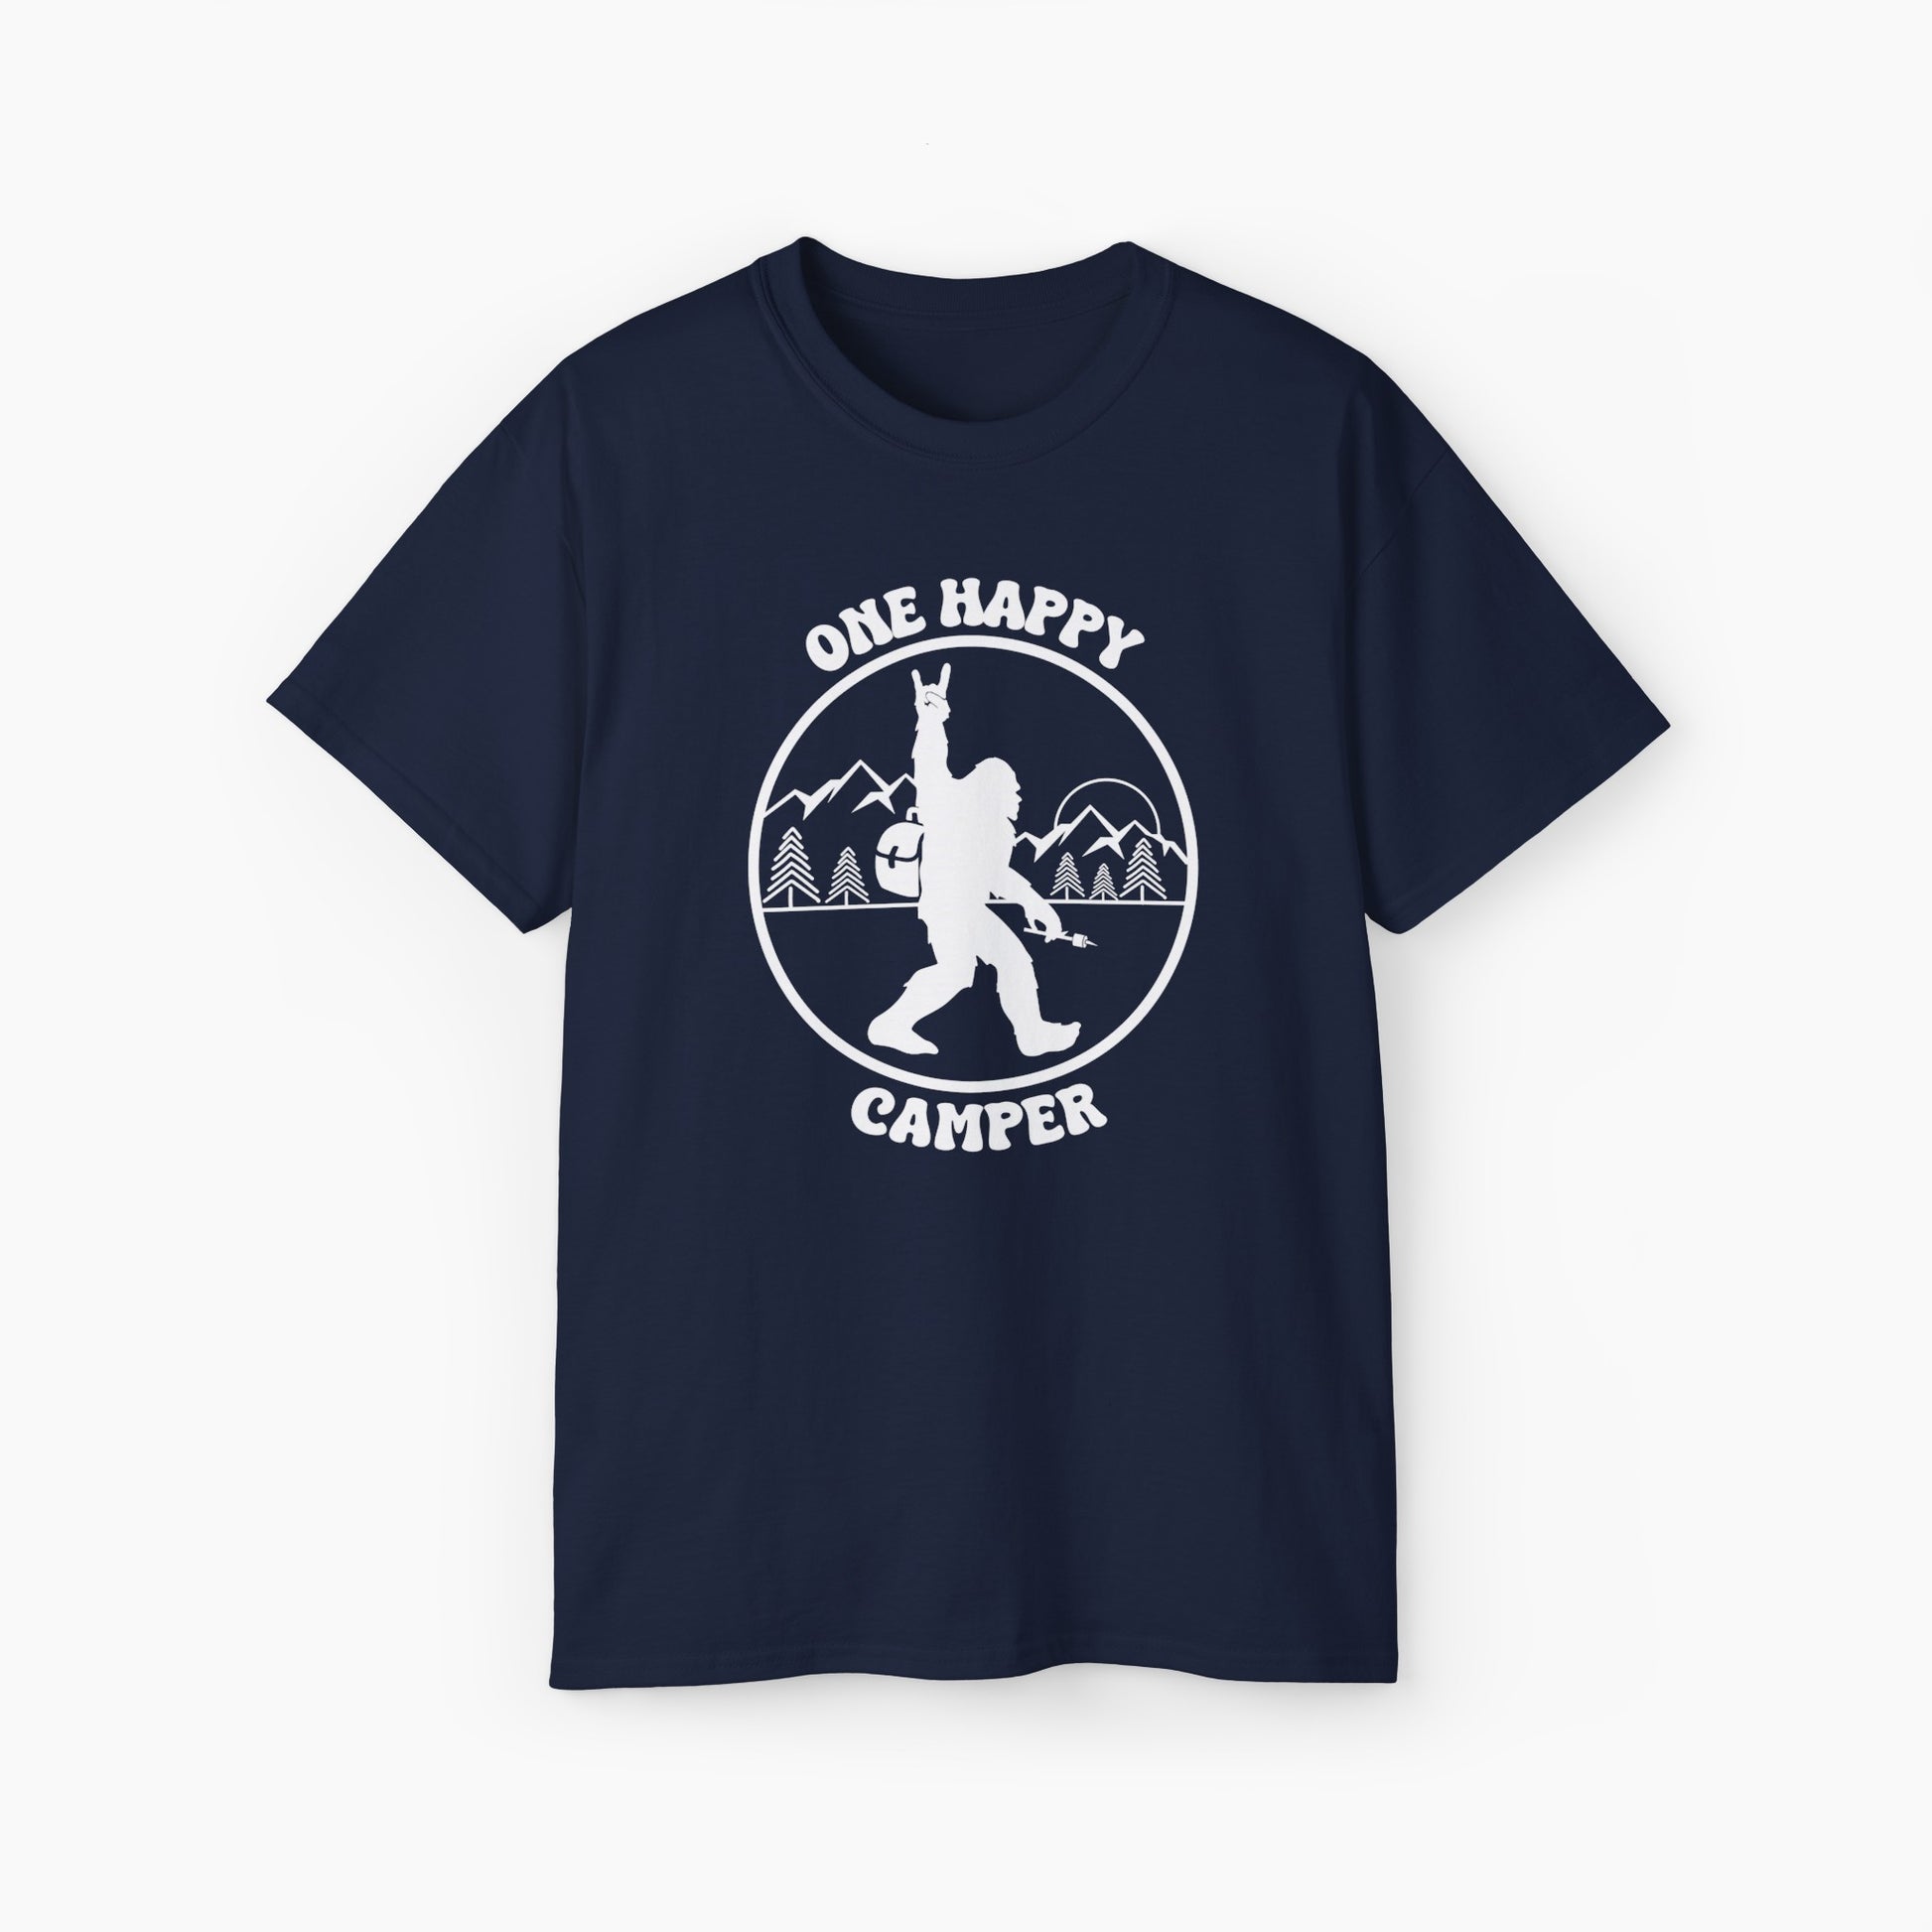 Dark blue t-shirt with 'One Happy Camper' text, featuring Bigfoot making a peace sign, set against a subtle background of trees and mountains.